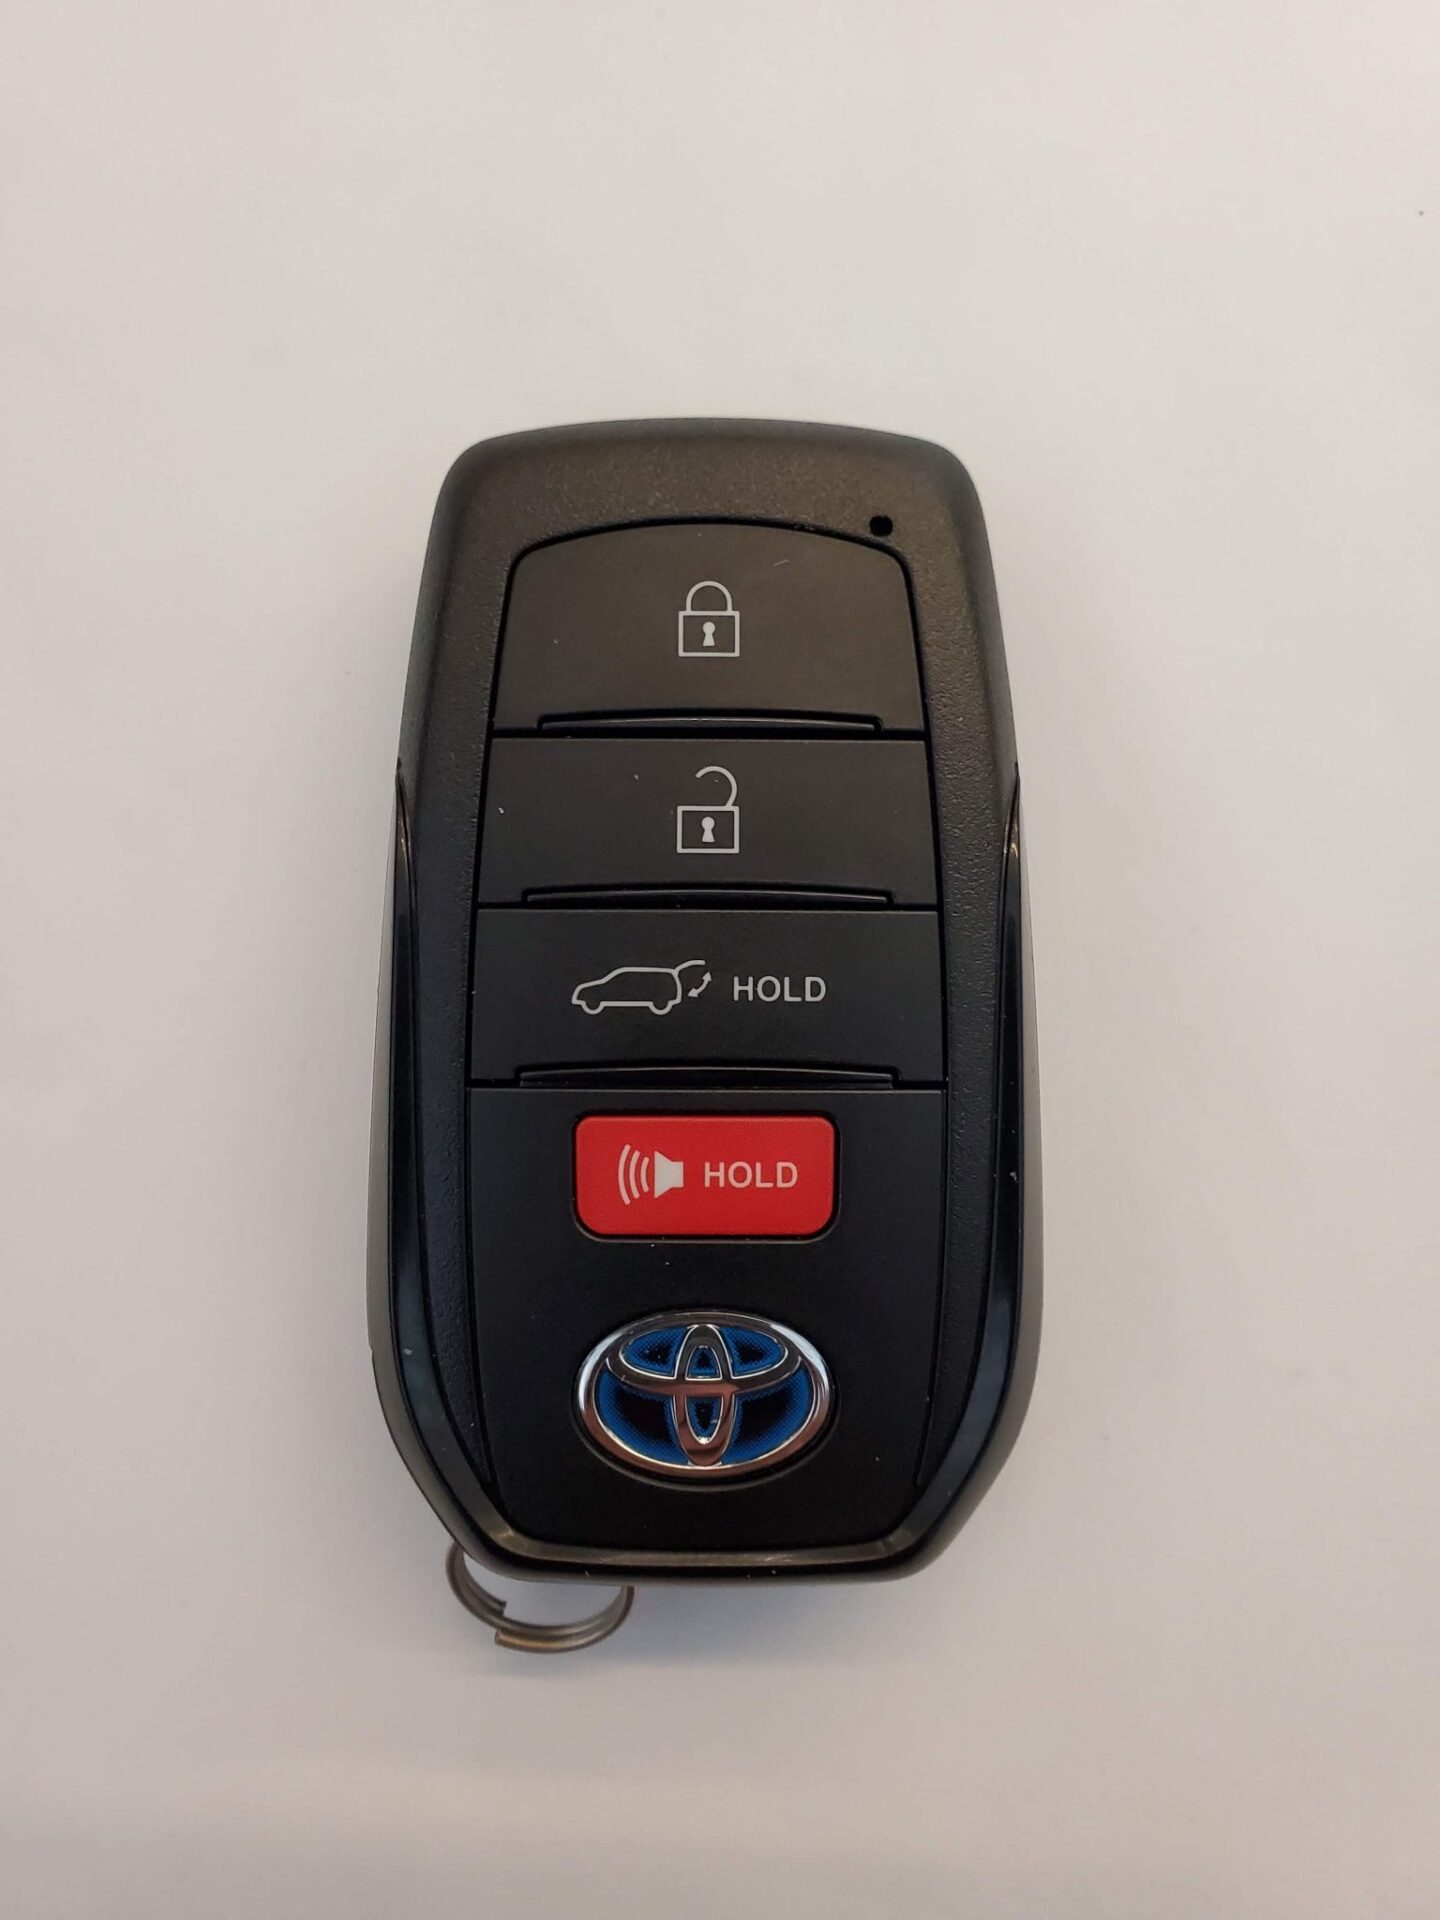 Toyota Sienna Replacement Keys What To Do, Options, Cost & More